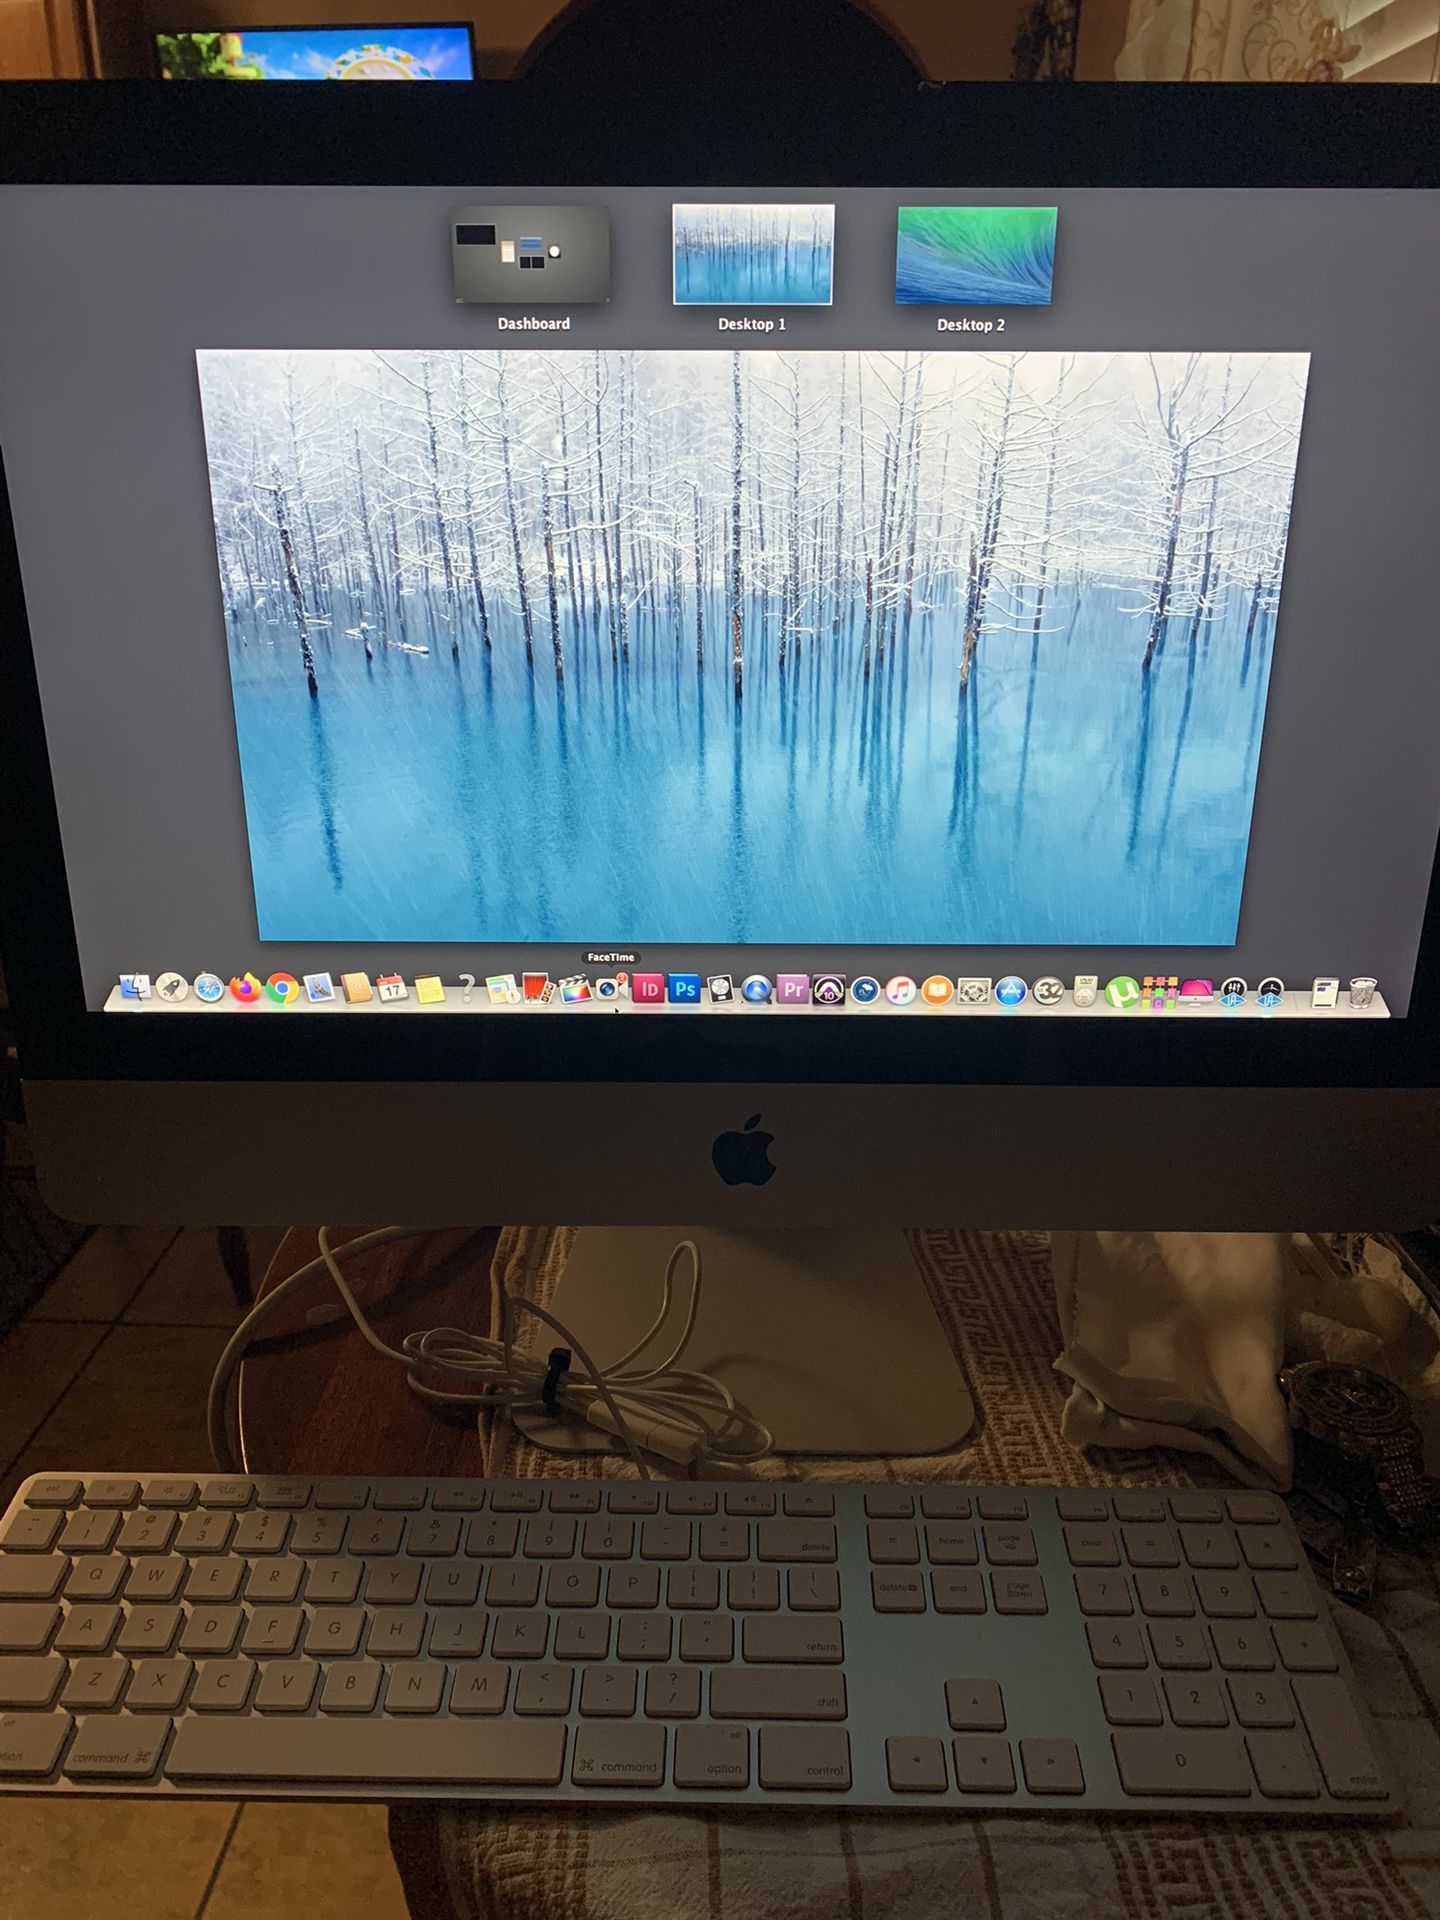 iMac 21.5-inch Mid 2011 w/ Pro Tools 10 Software 